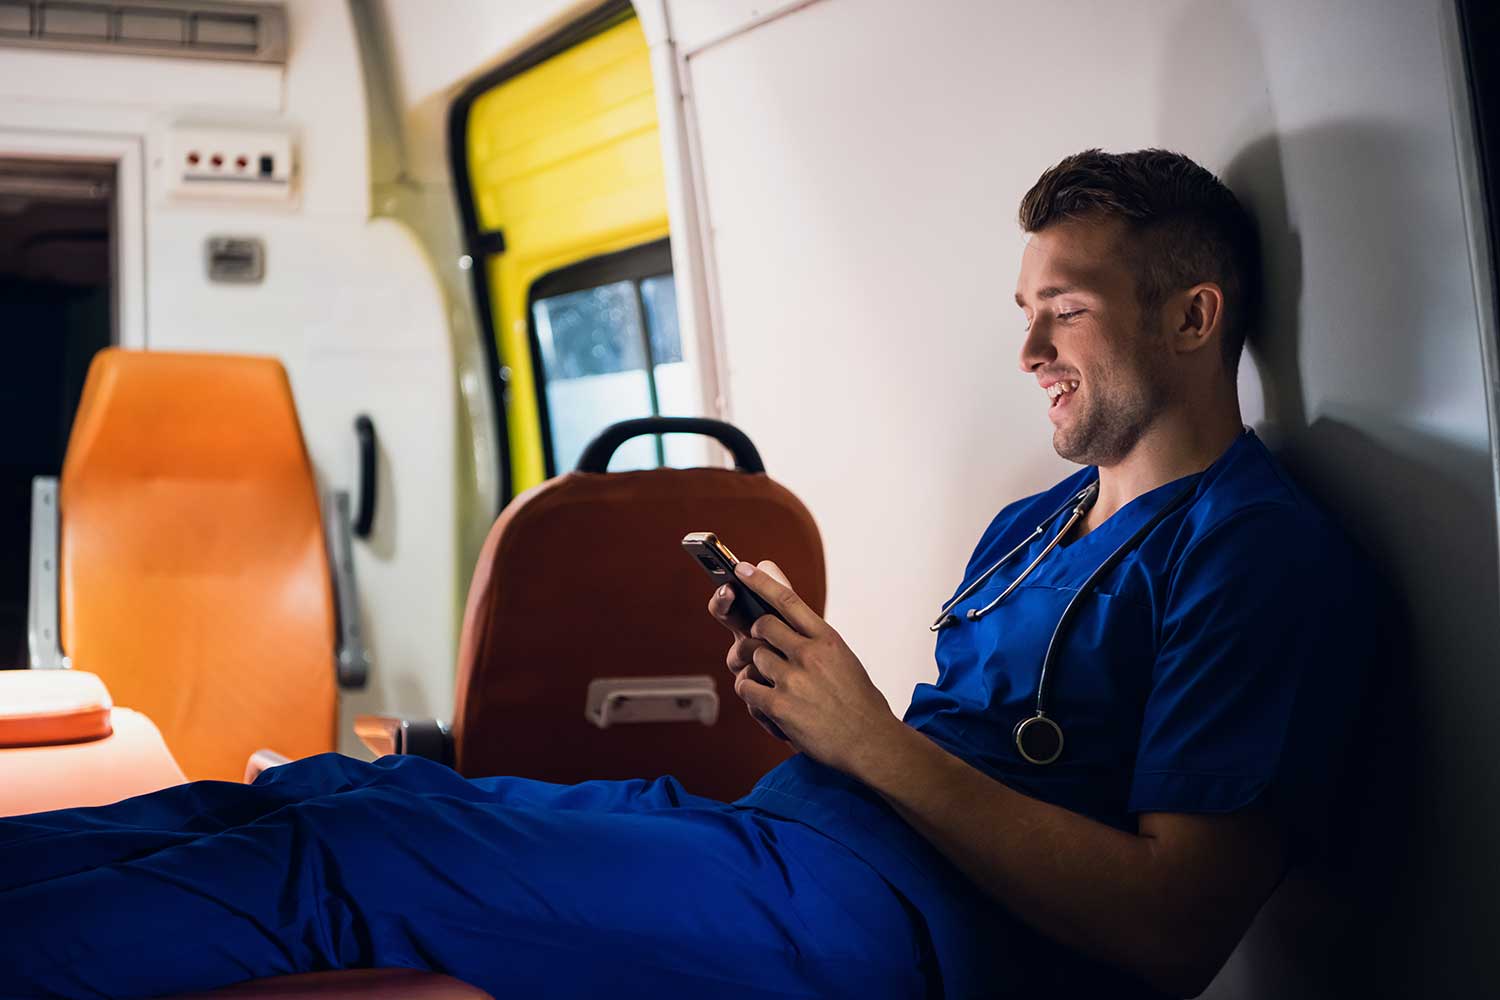 South Central Ambulance Service chooses to modernise its workforce management with Allocate Software